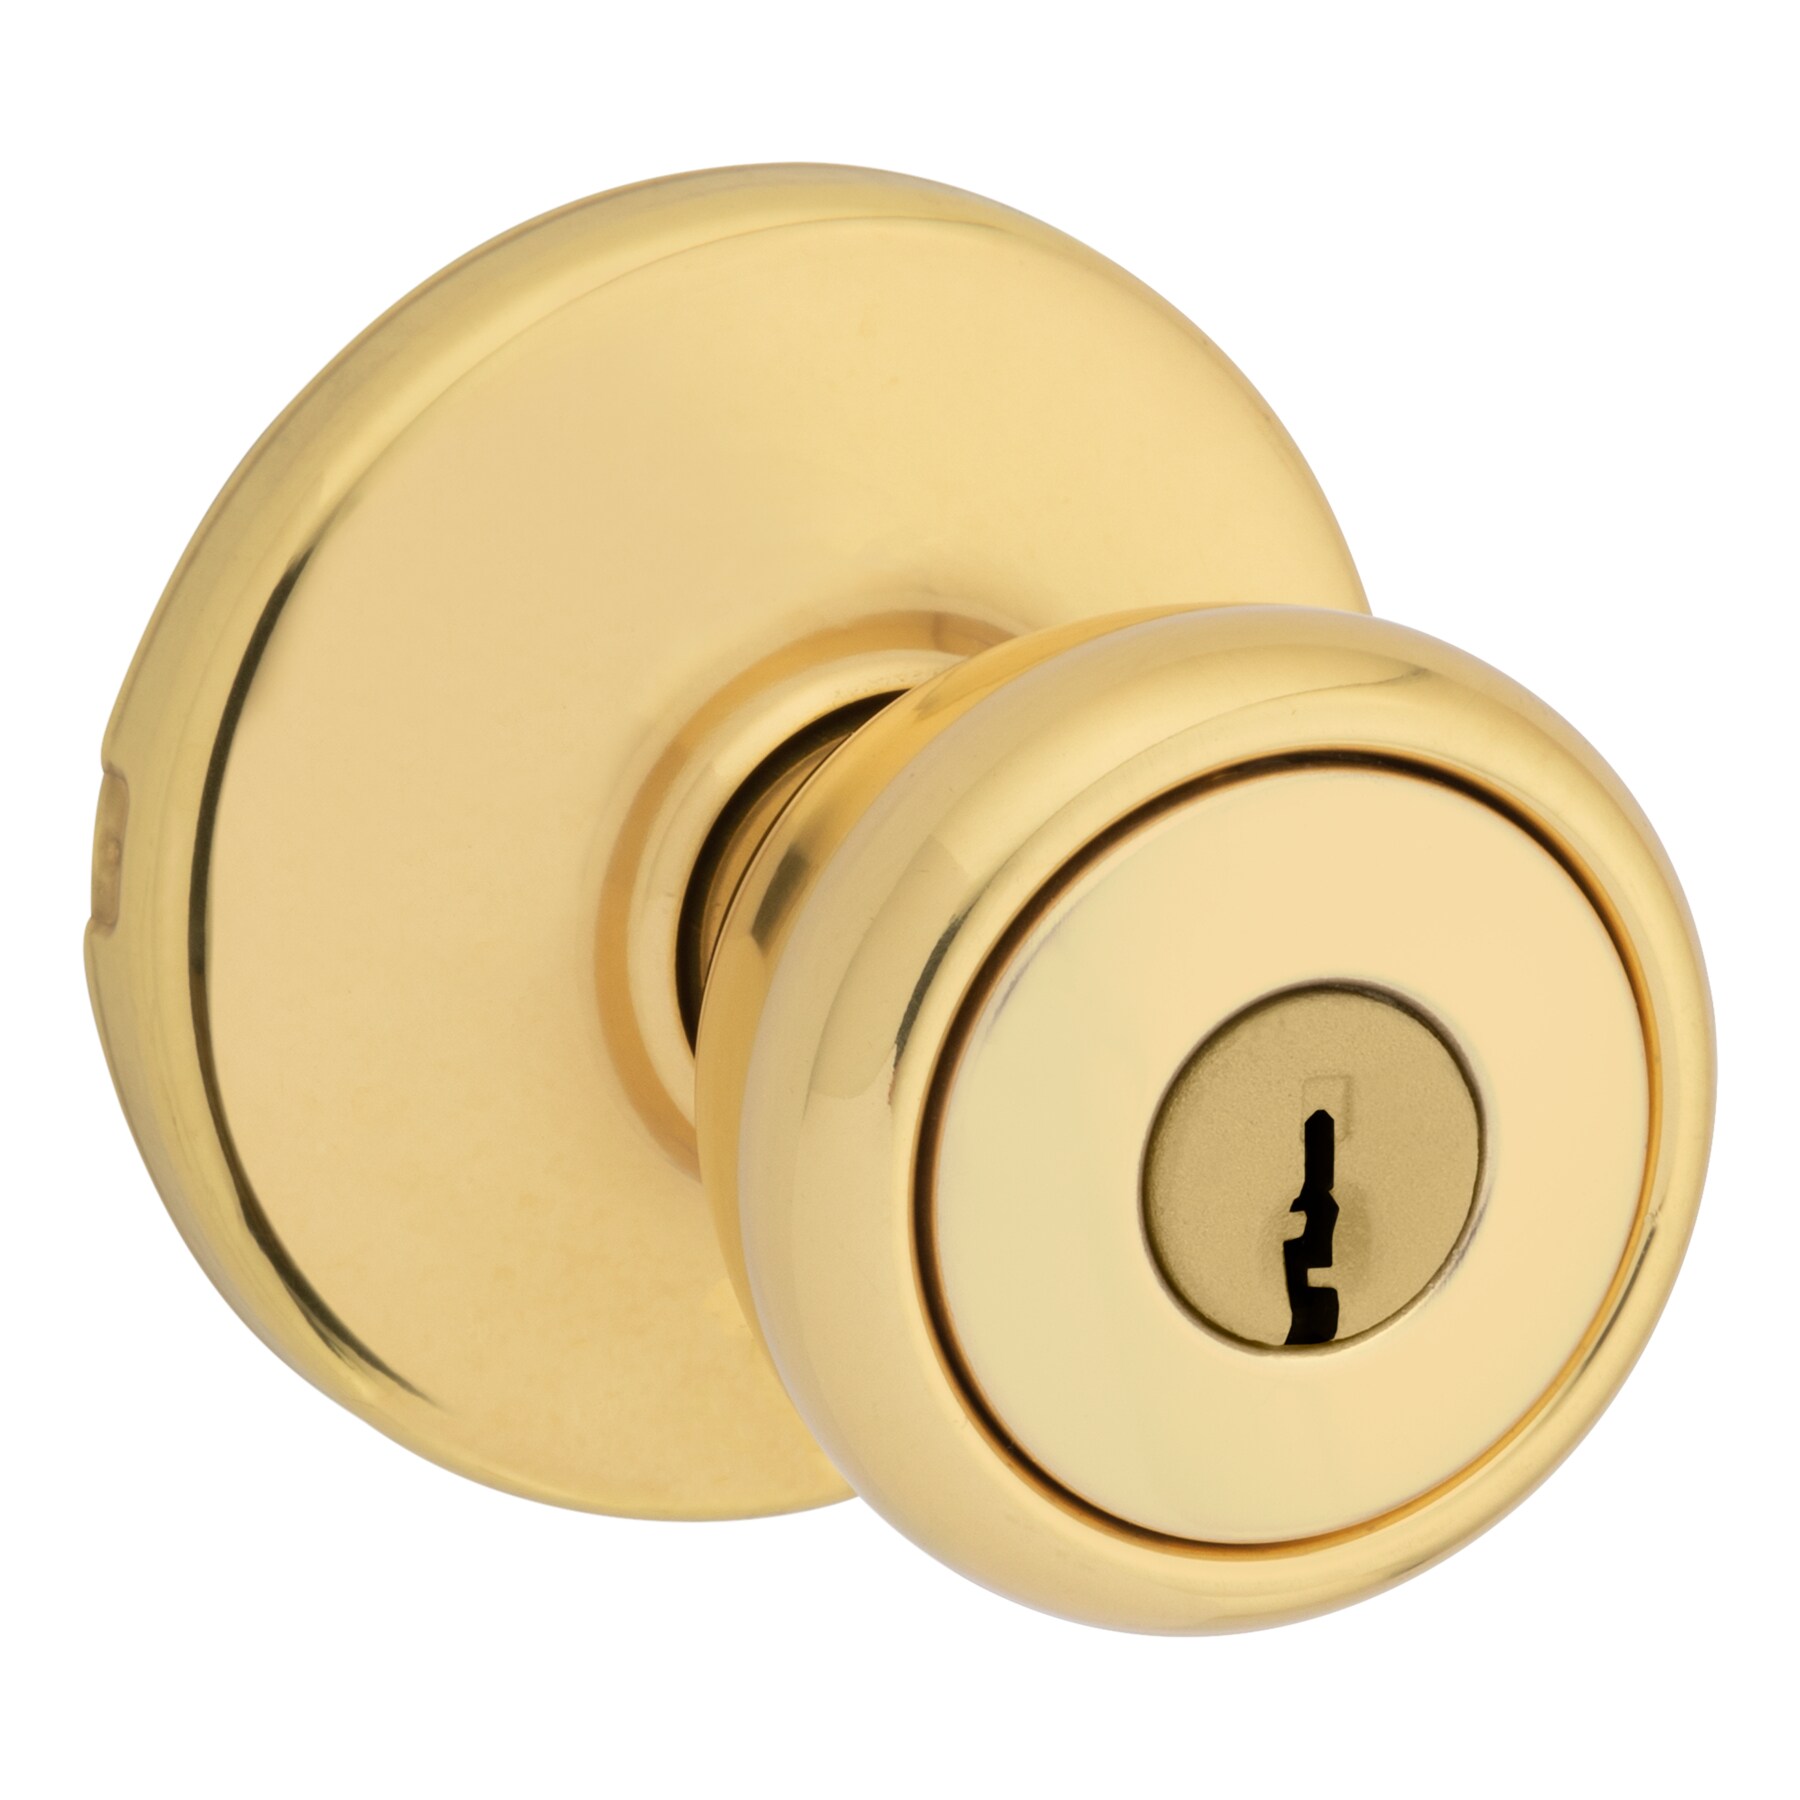 Kwikset Security Tylo Polished Brass Keyed Entry Door Knob in the 